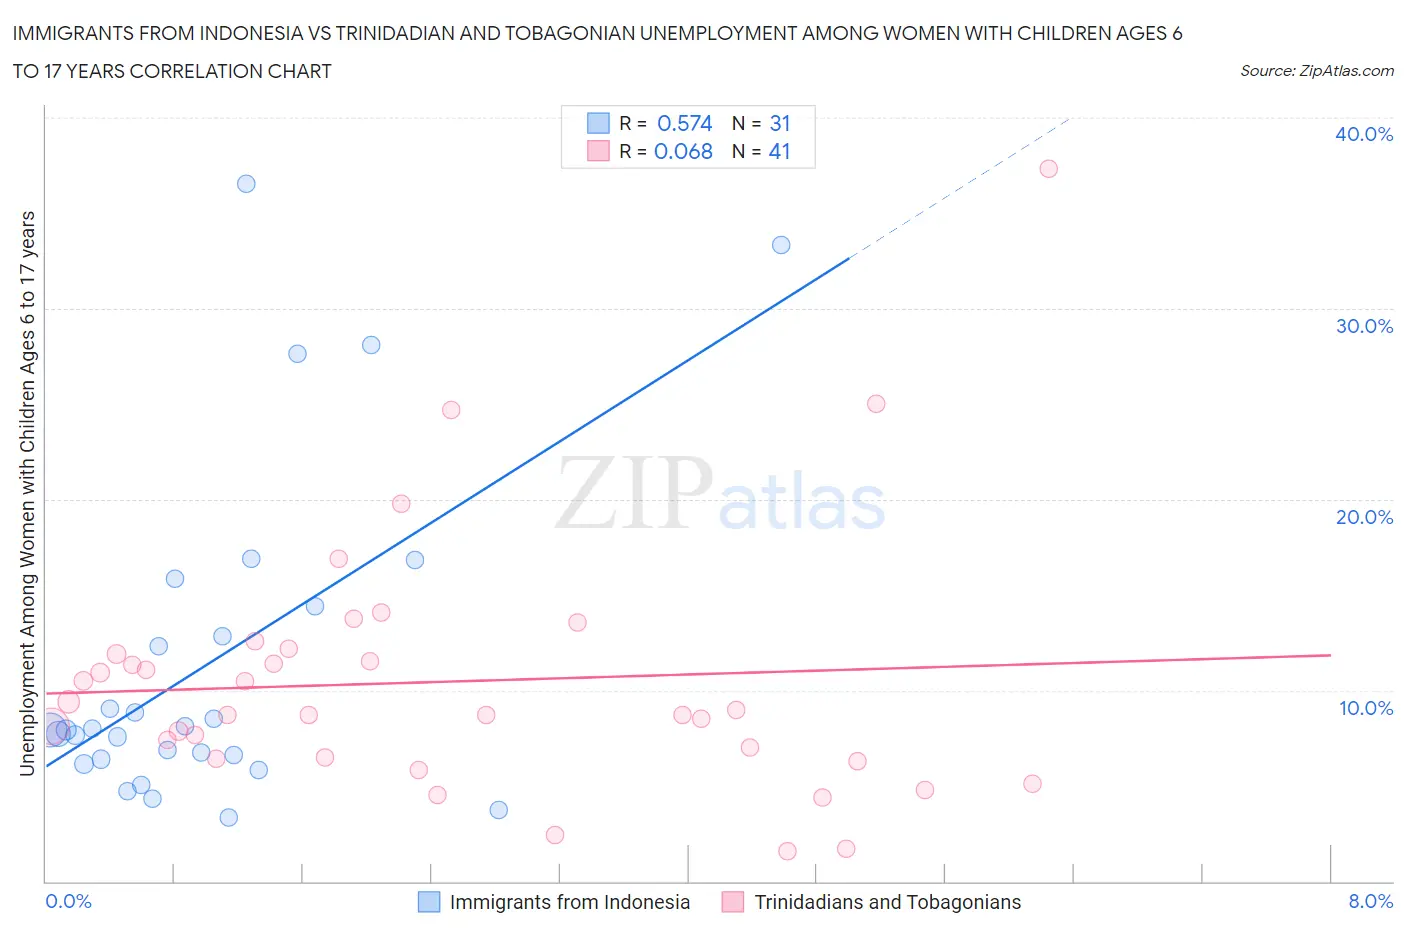 Immigrants from Indonesia vs Trinidadian and Tobagonian Unemployment Among Women with Children Ages 6 to 17 years